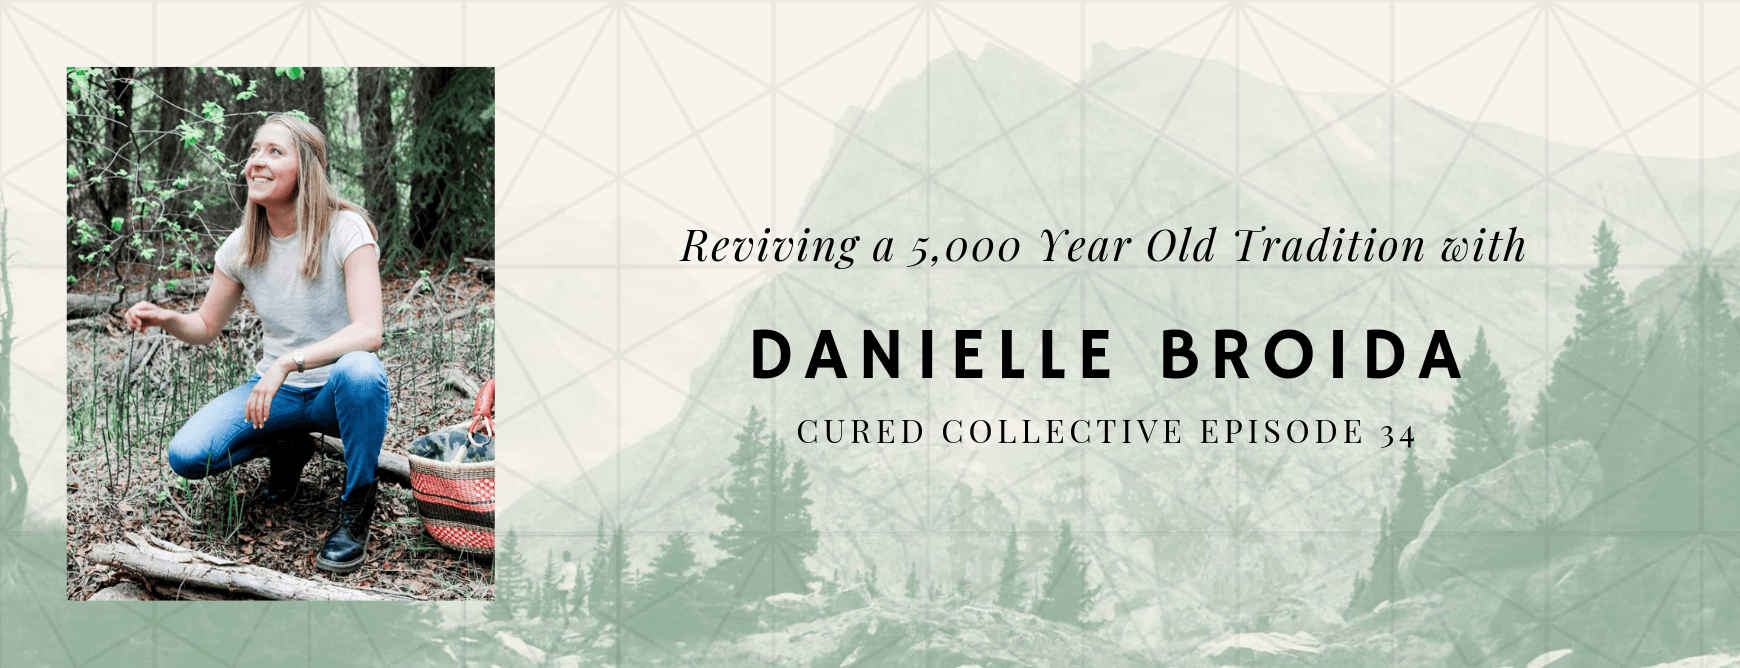  Reviving a 5,000 Year Old Tradition with Danielle Broida